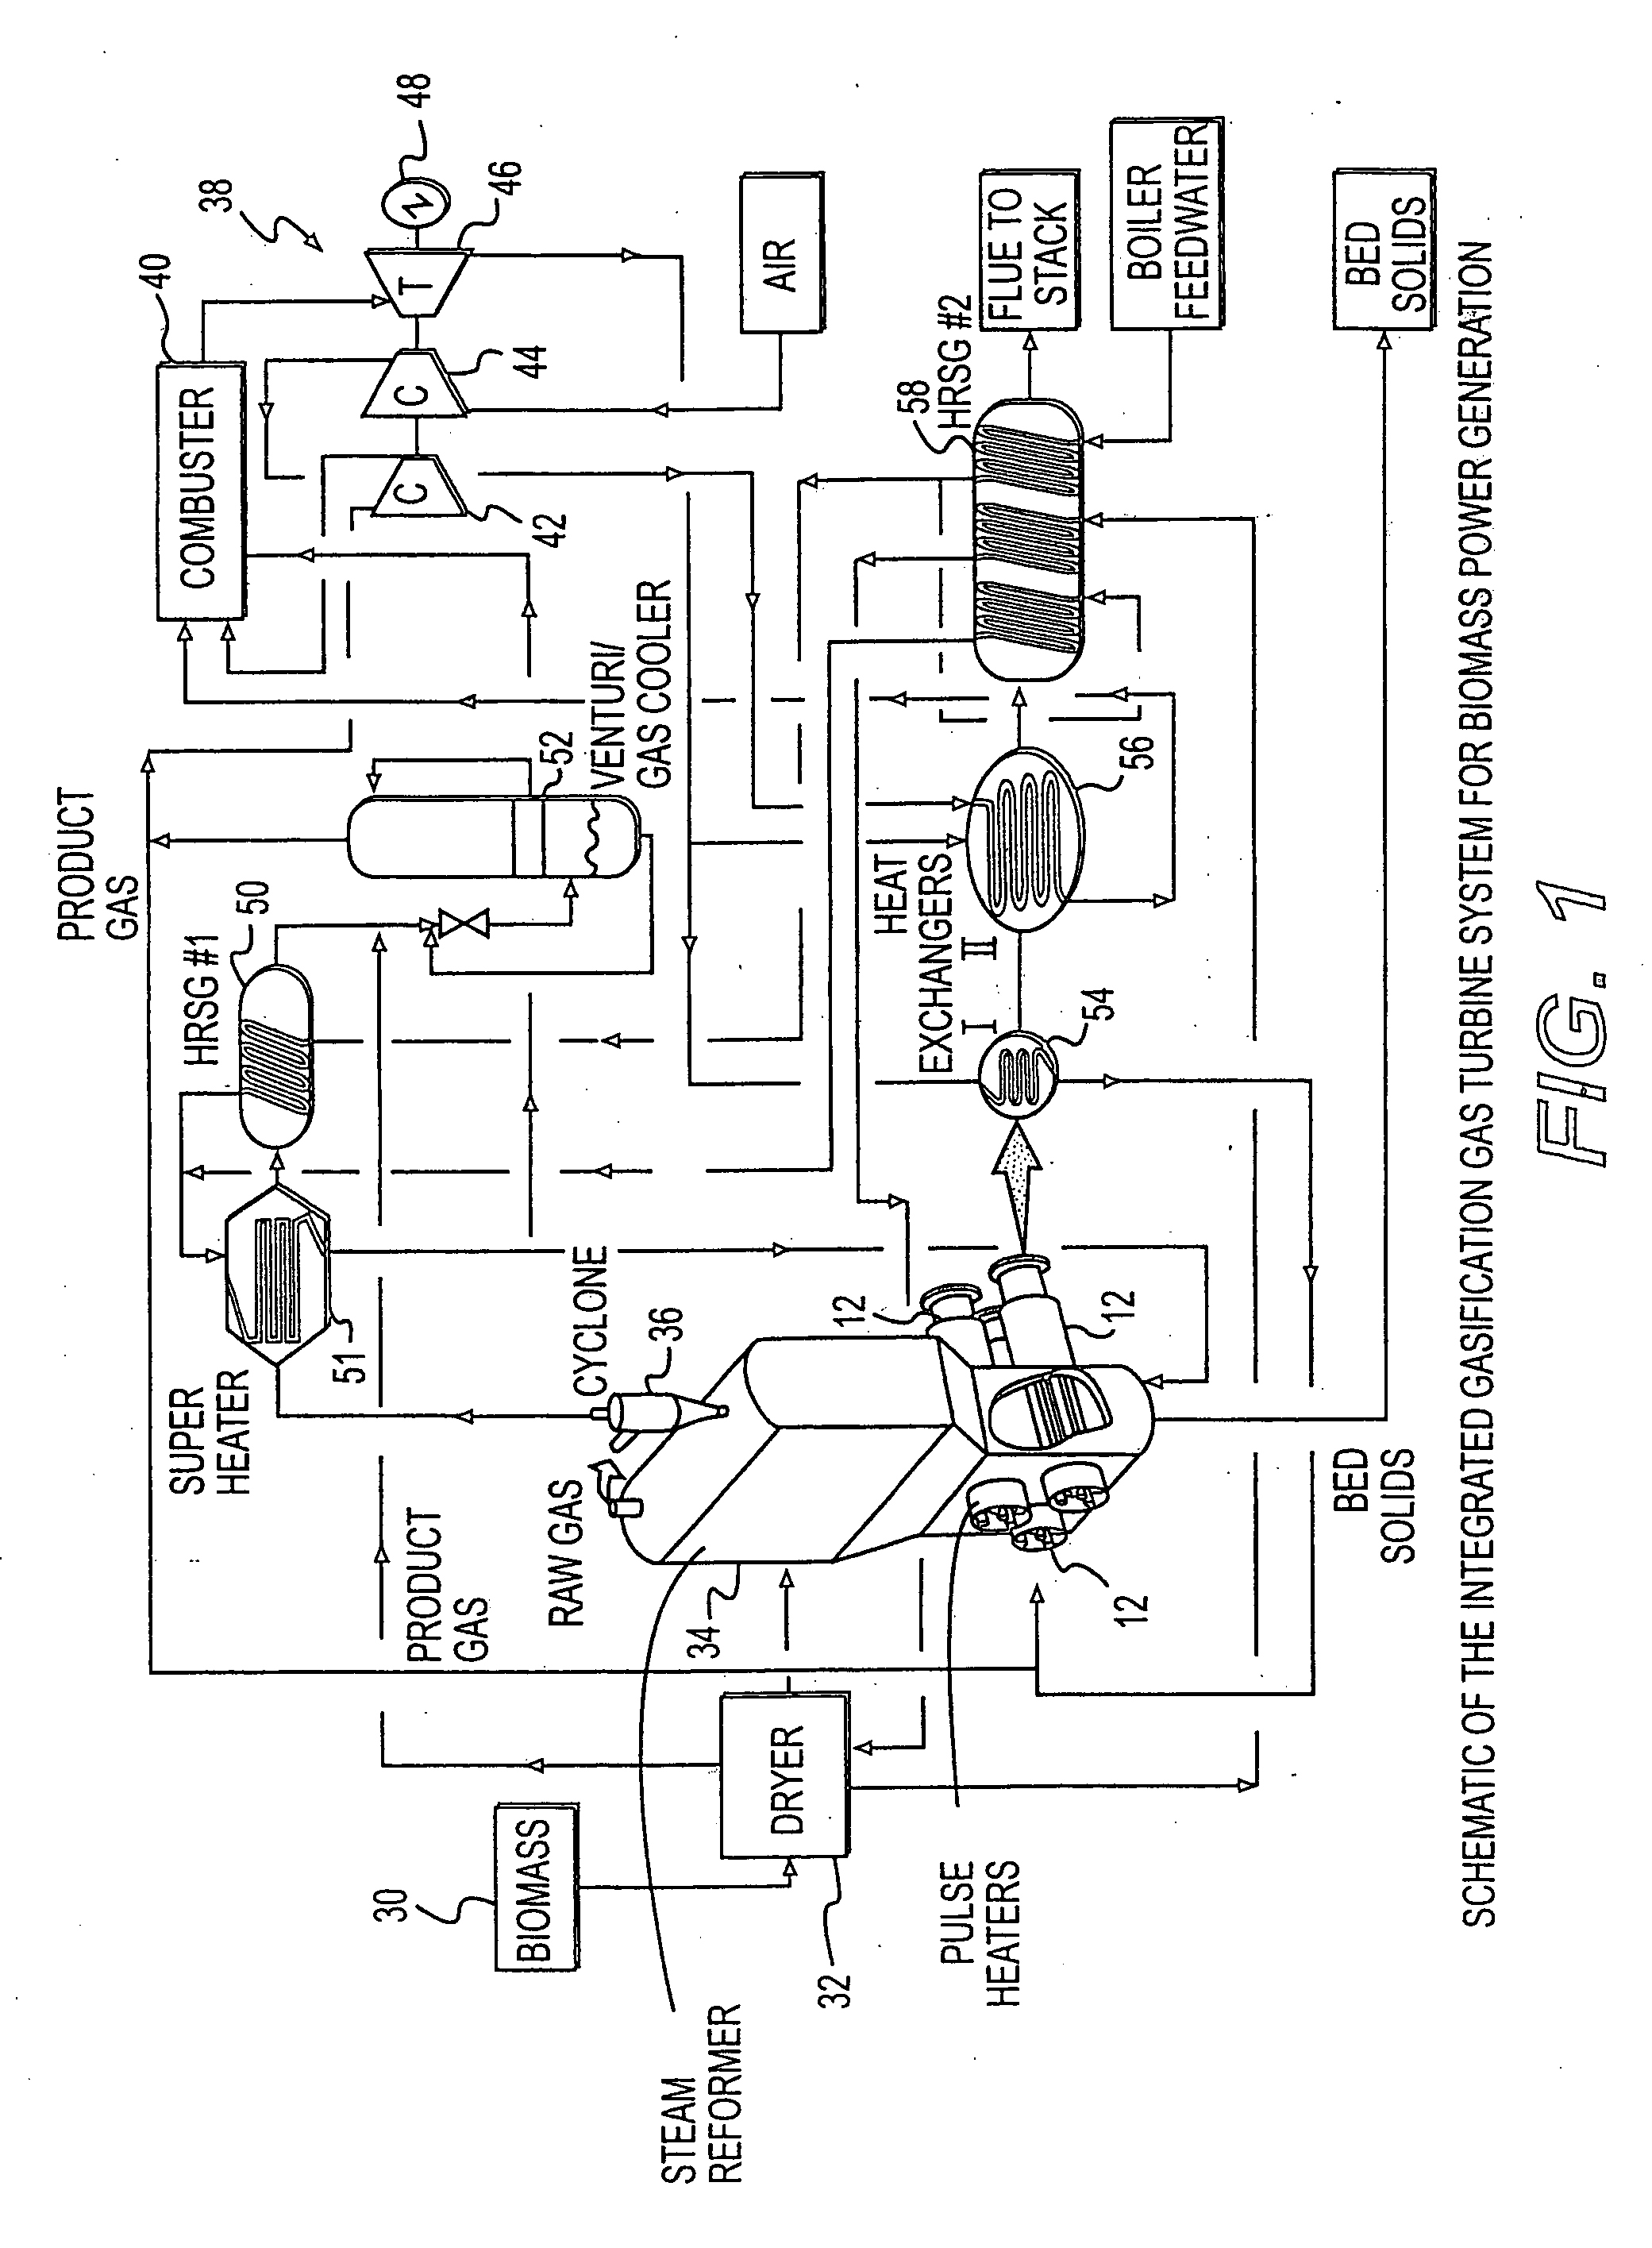 System integration of a steam reformer and gas turbine